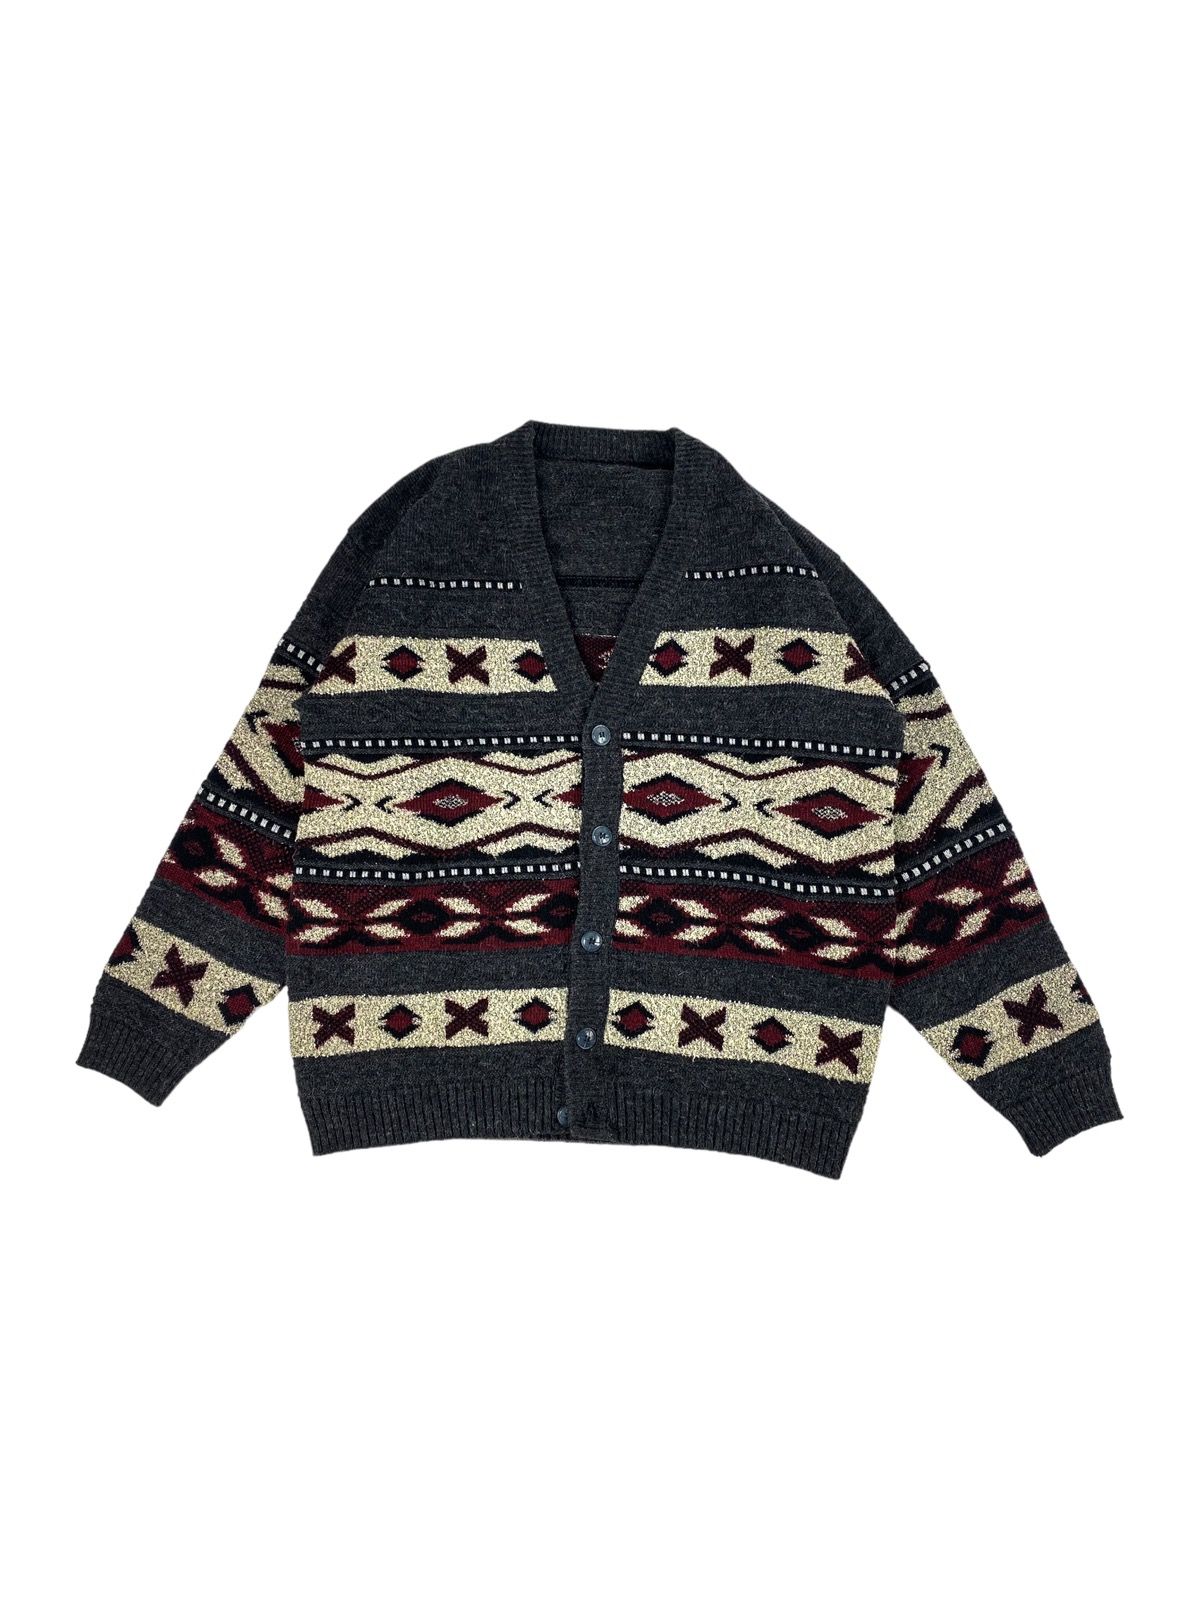 Pre-owned Coloured Cable Knit Sweater X Coogi Colored Vintage Aztec Cardigan Size Large By Missoni Style In Multicolor